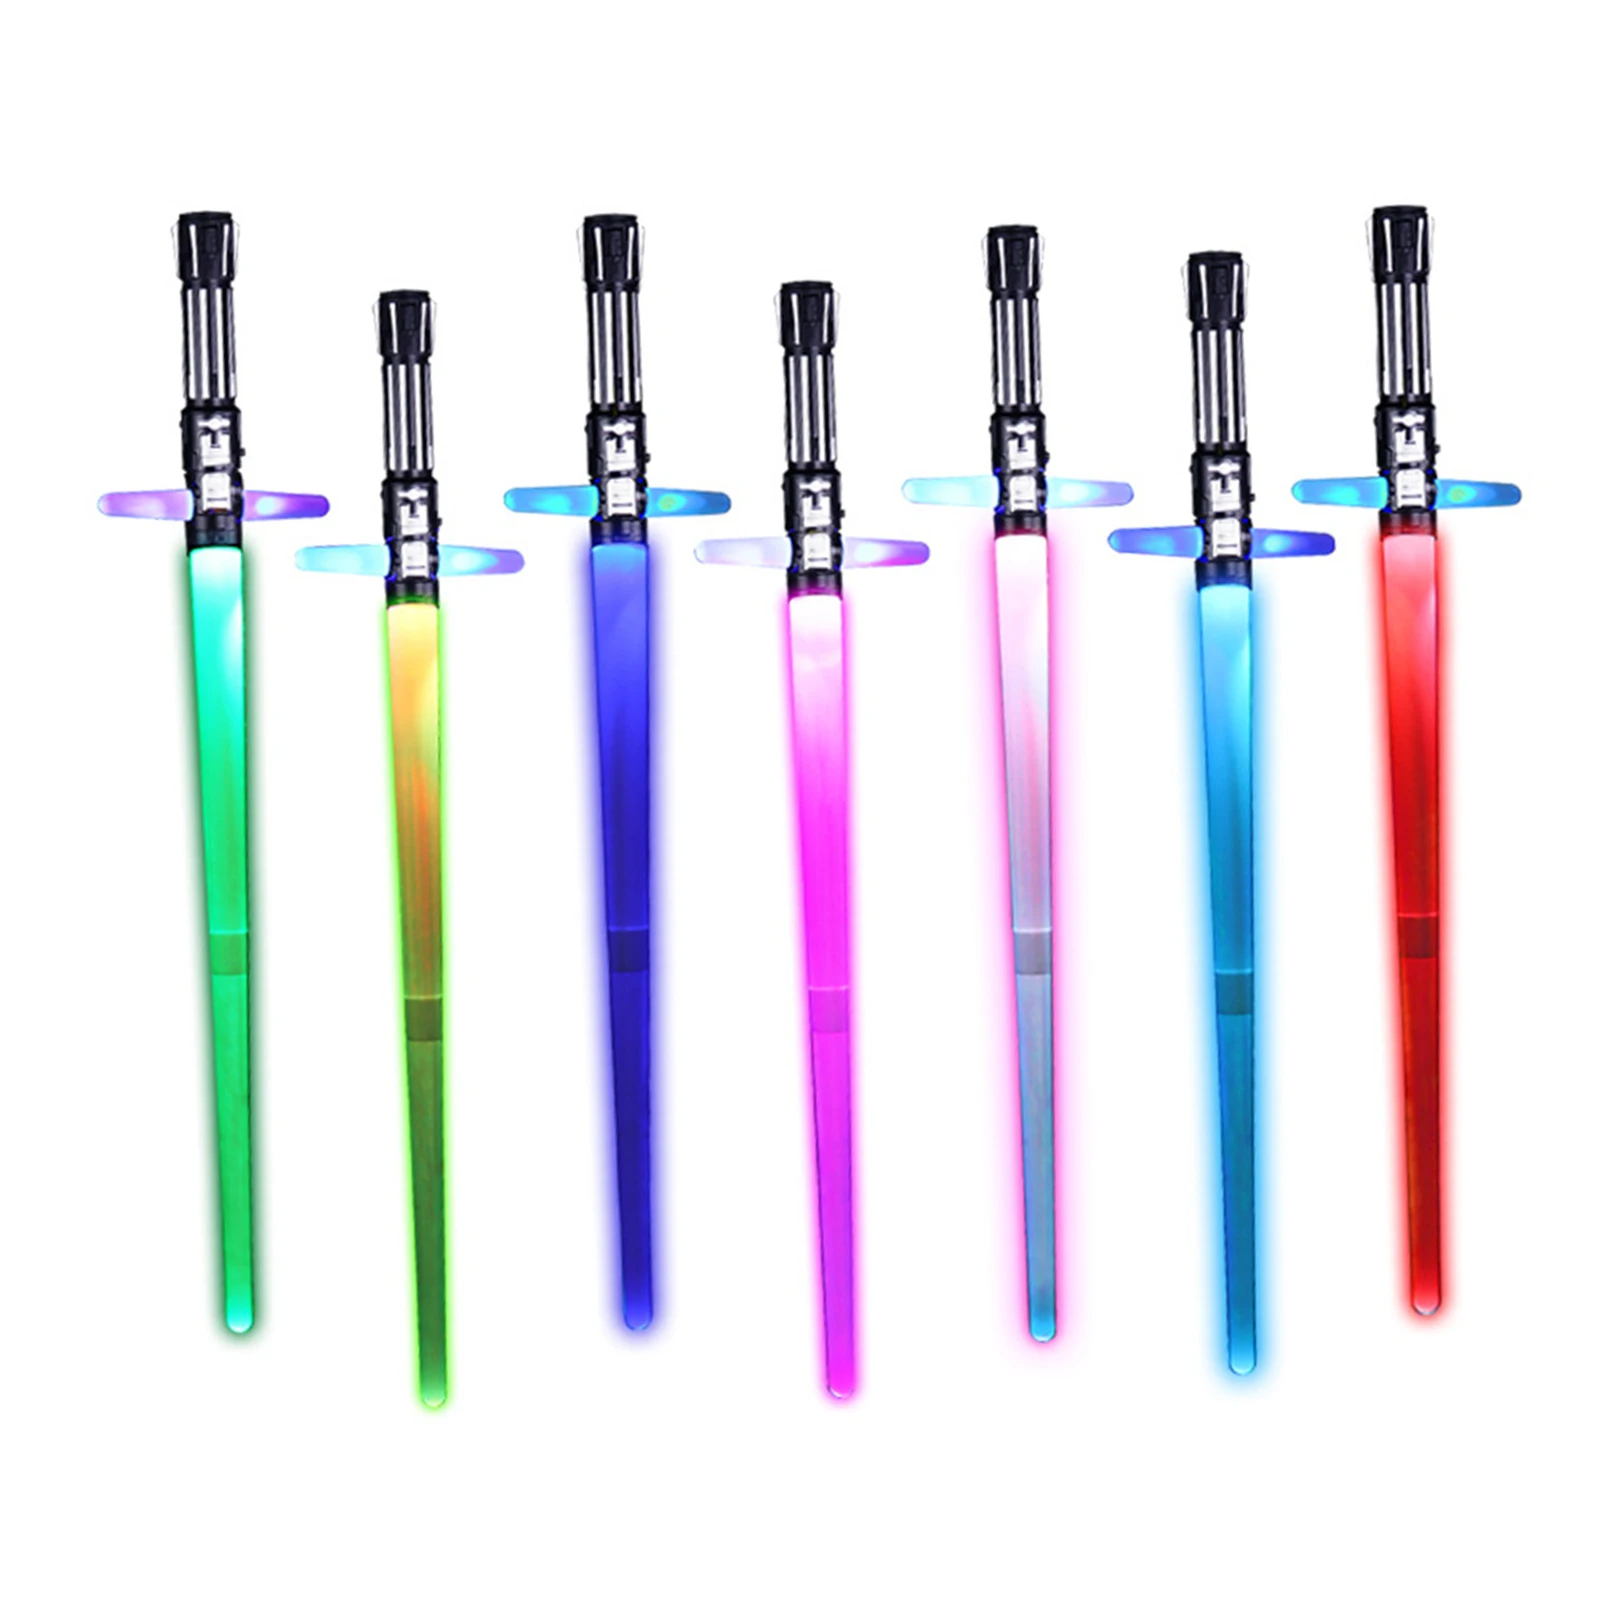 2-in-1 LED Flashing Lightsaber Roleplay War Fighters Toy Birthday Presents